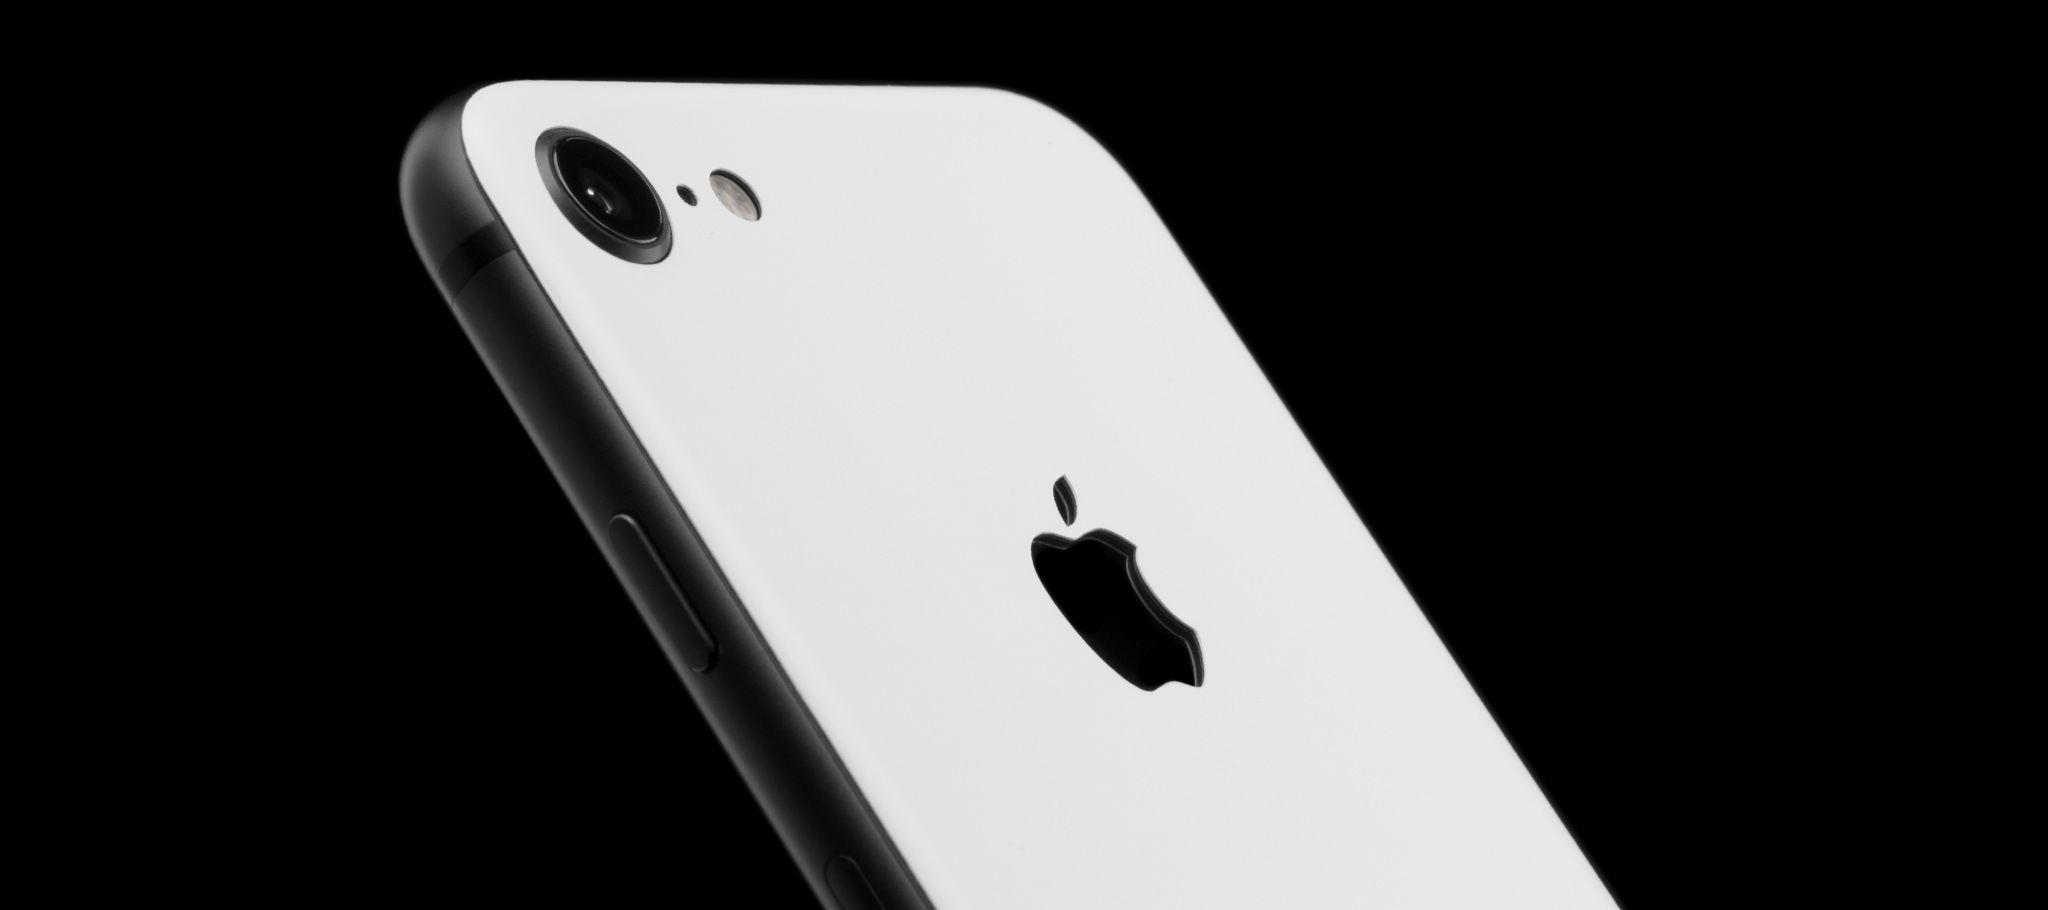 D Brand Logo - iPhone 8 Skins, Wraps & Covers » dbrand